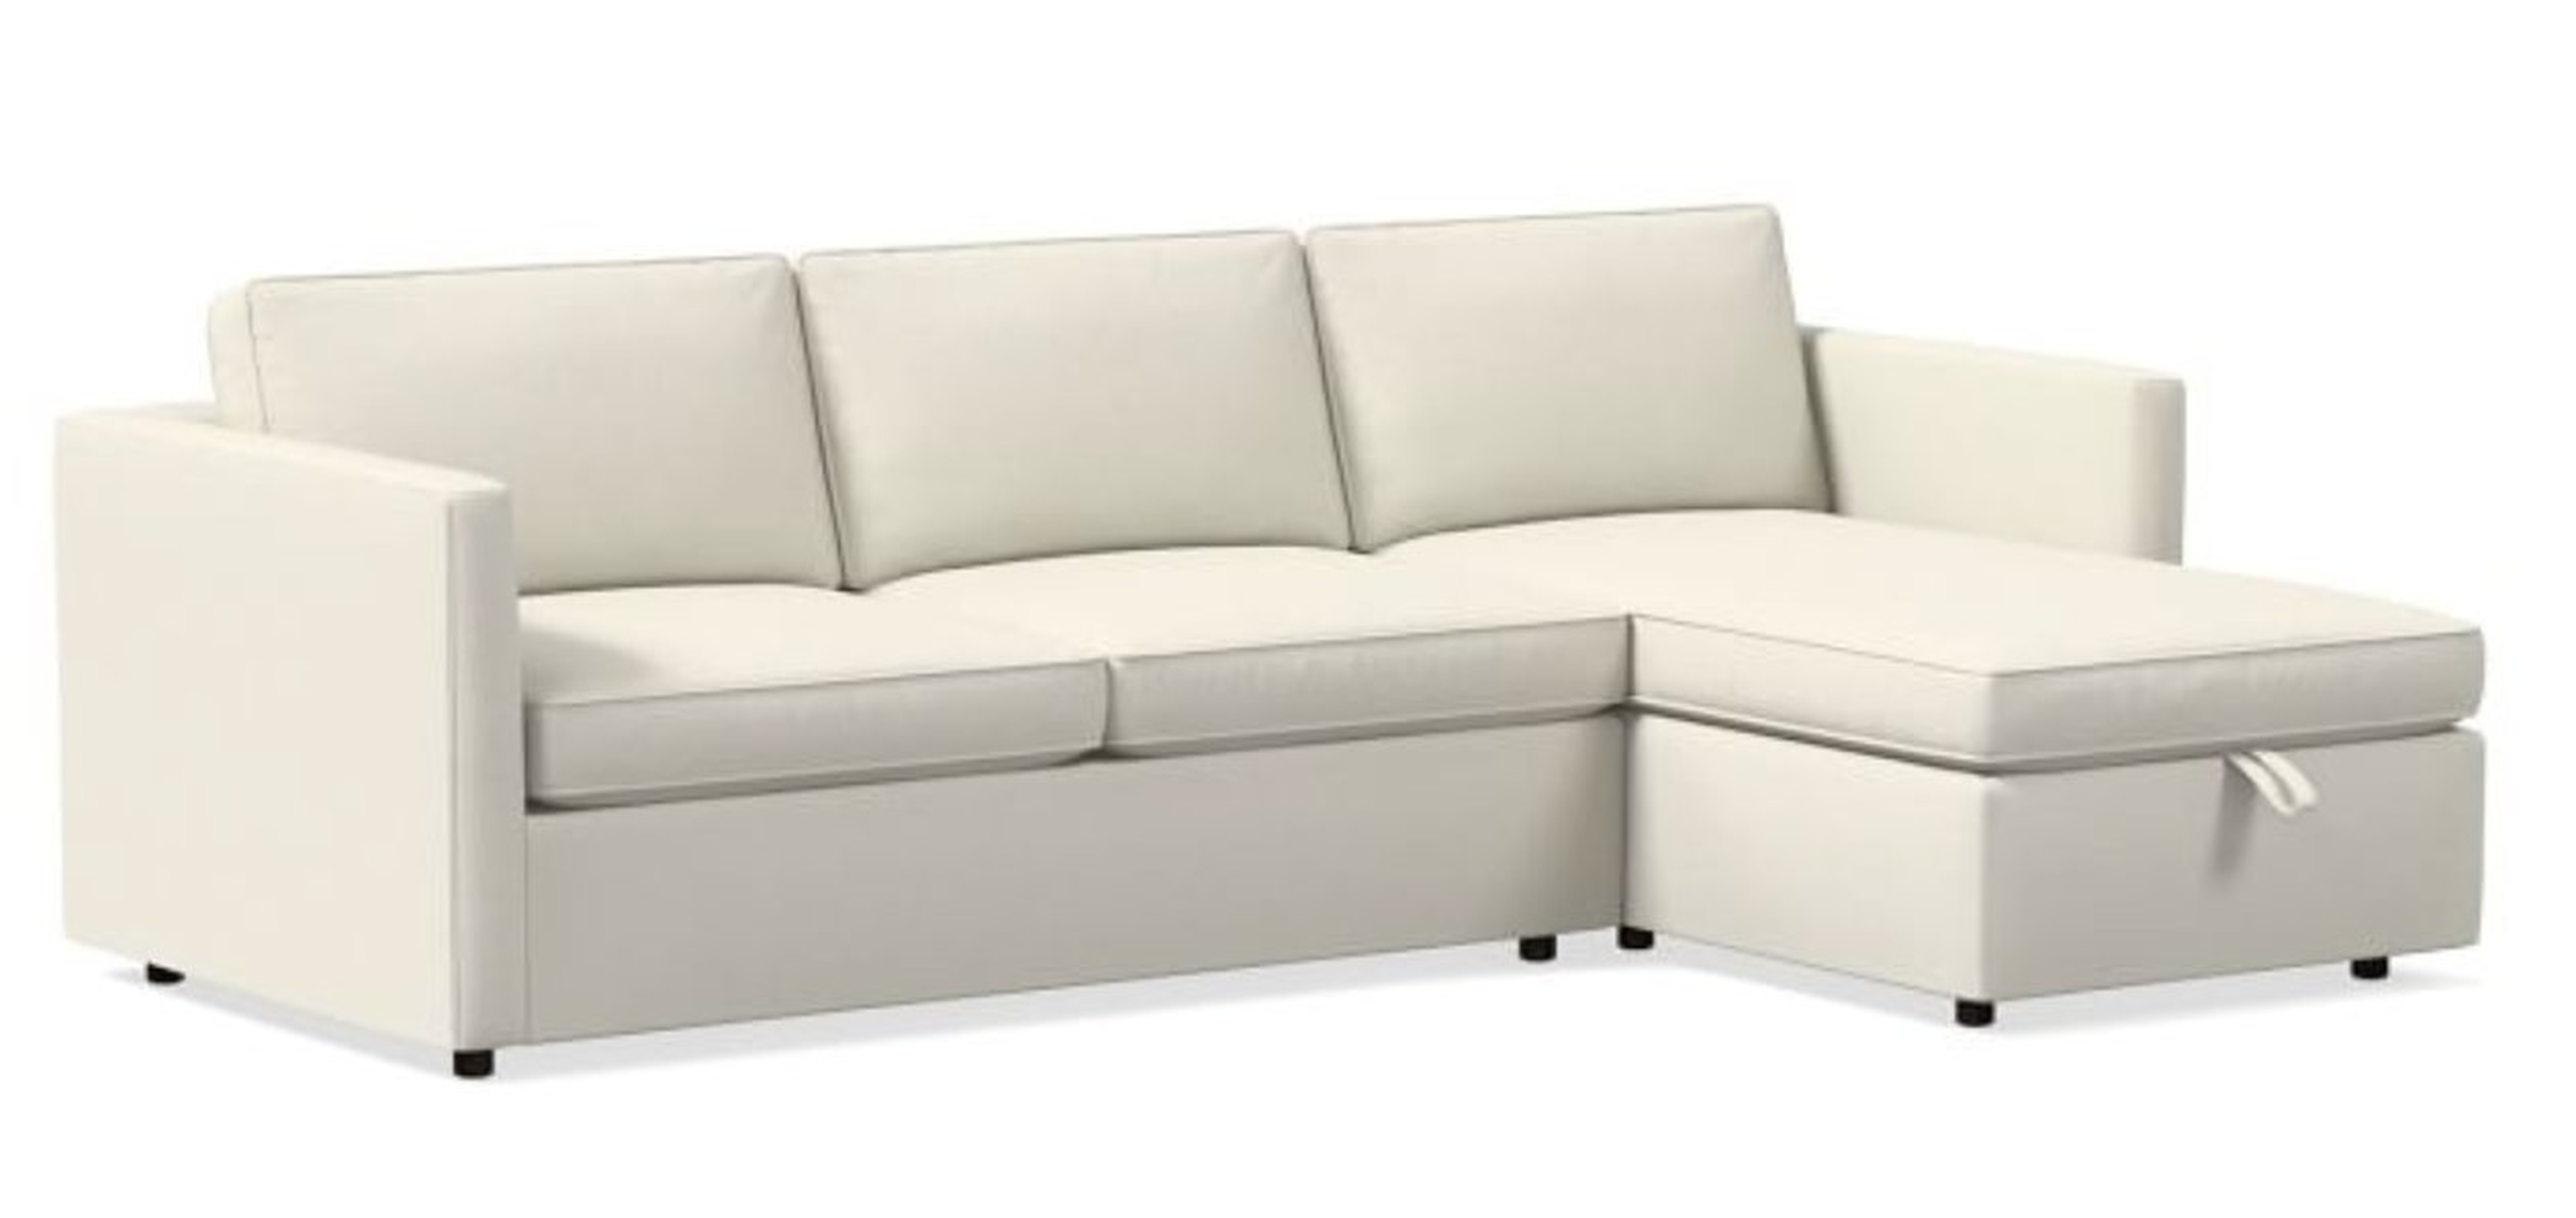 Harris Right 2-Piece Chaise Sectional w/ Storage - West Elm